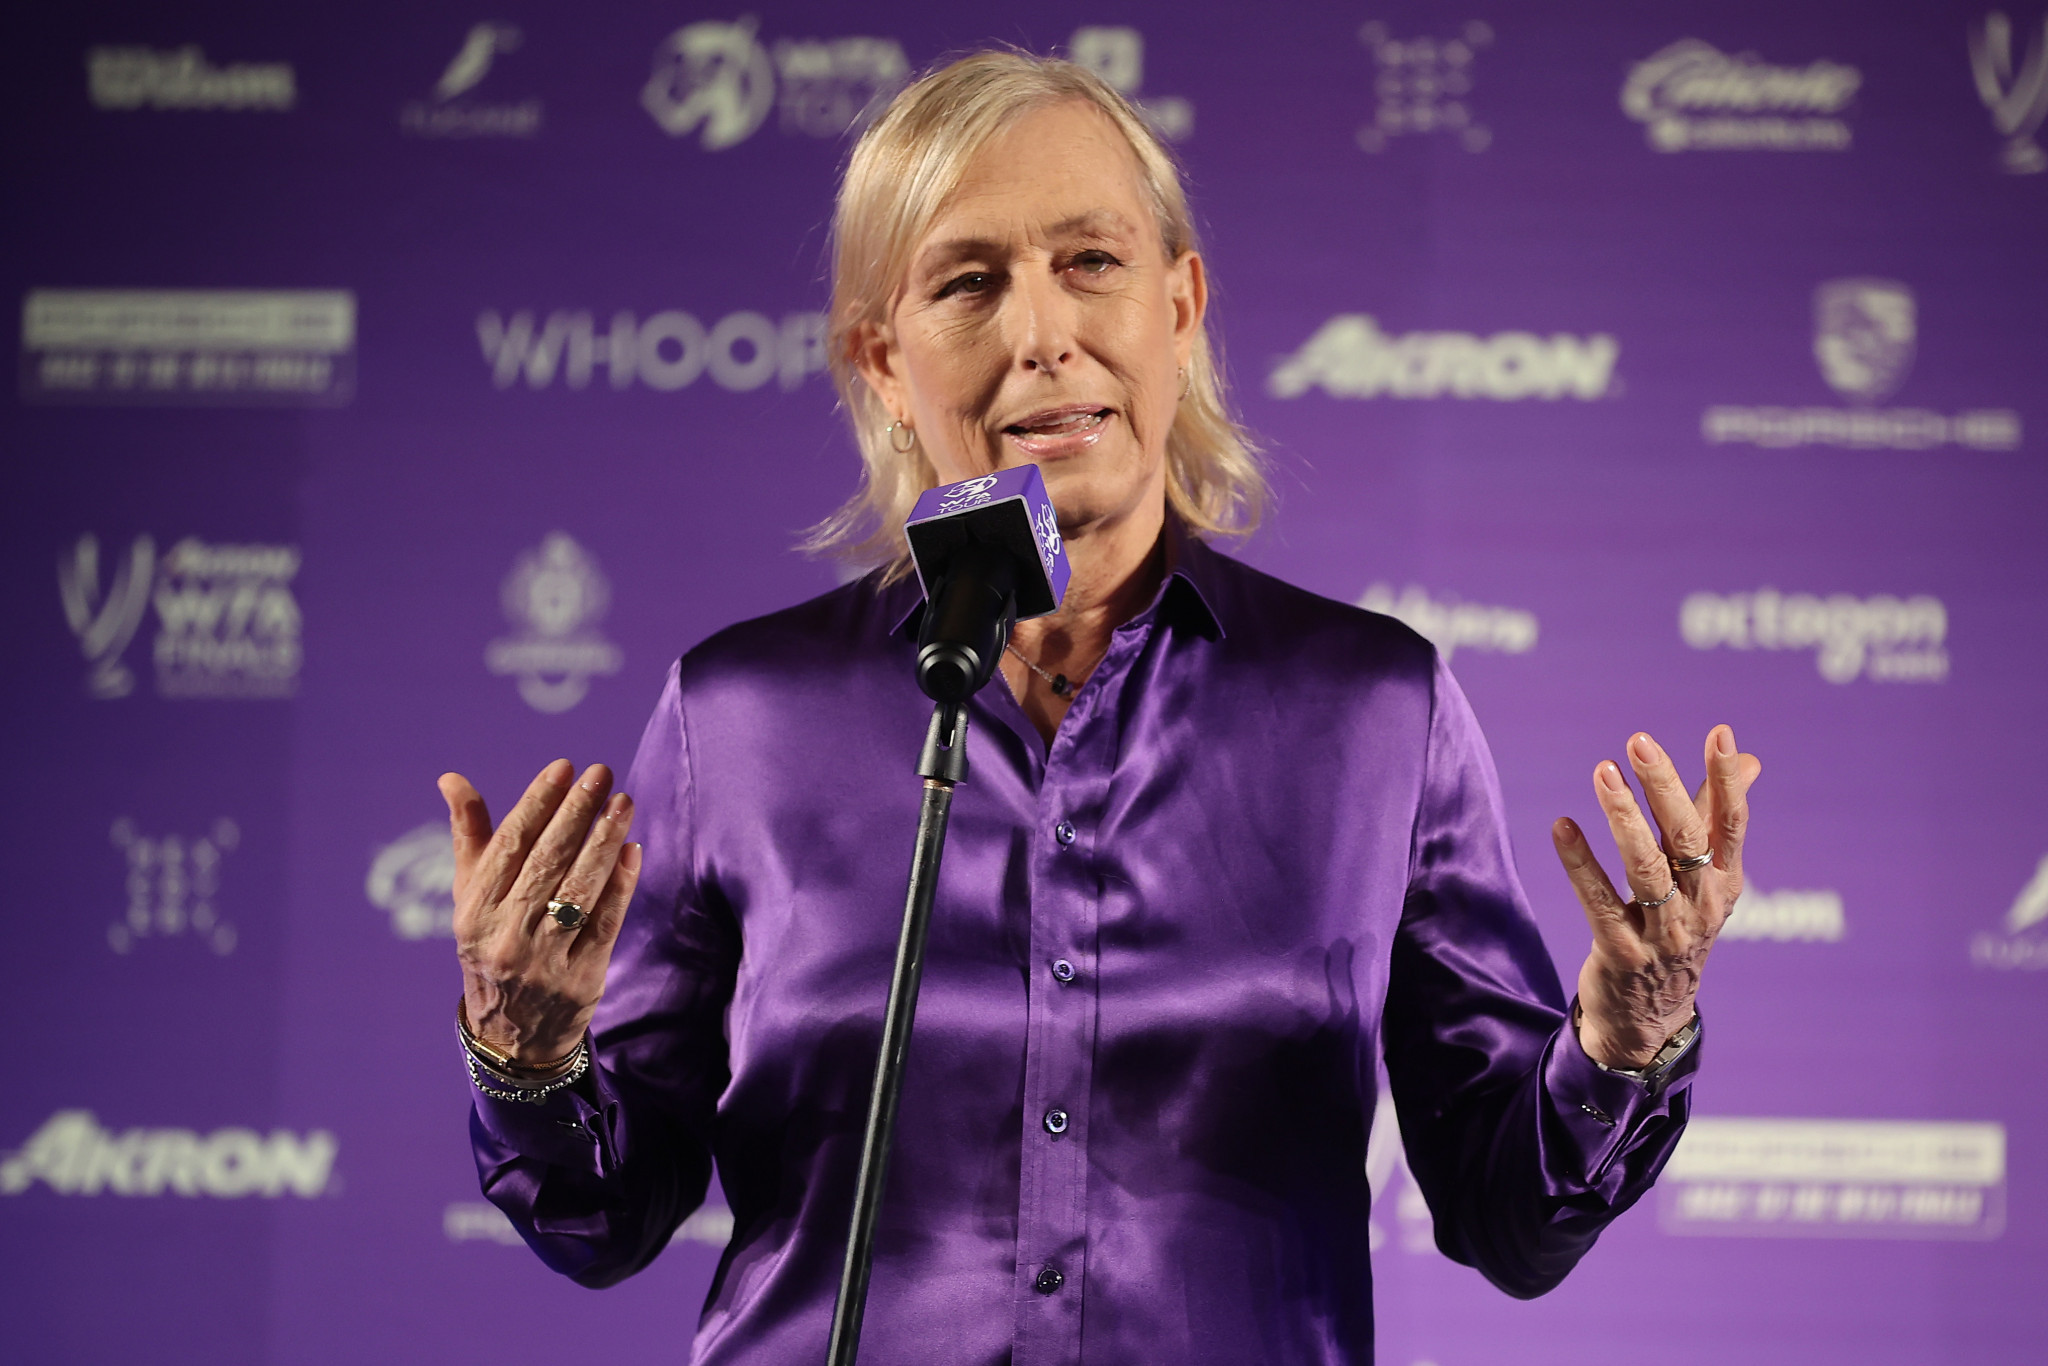 Martina Navratilova has claimed the IOC has "completely punted" its responsibility on eligibility rules for transgender athletes ©Getty Images